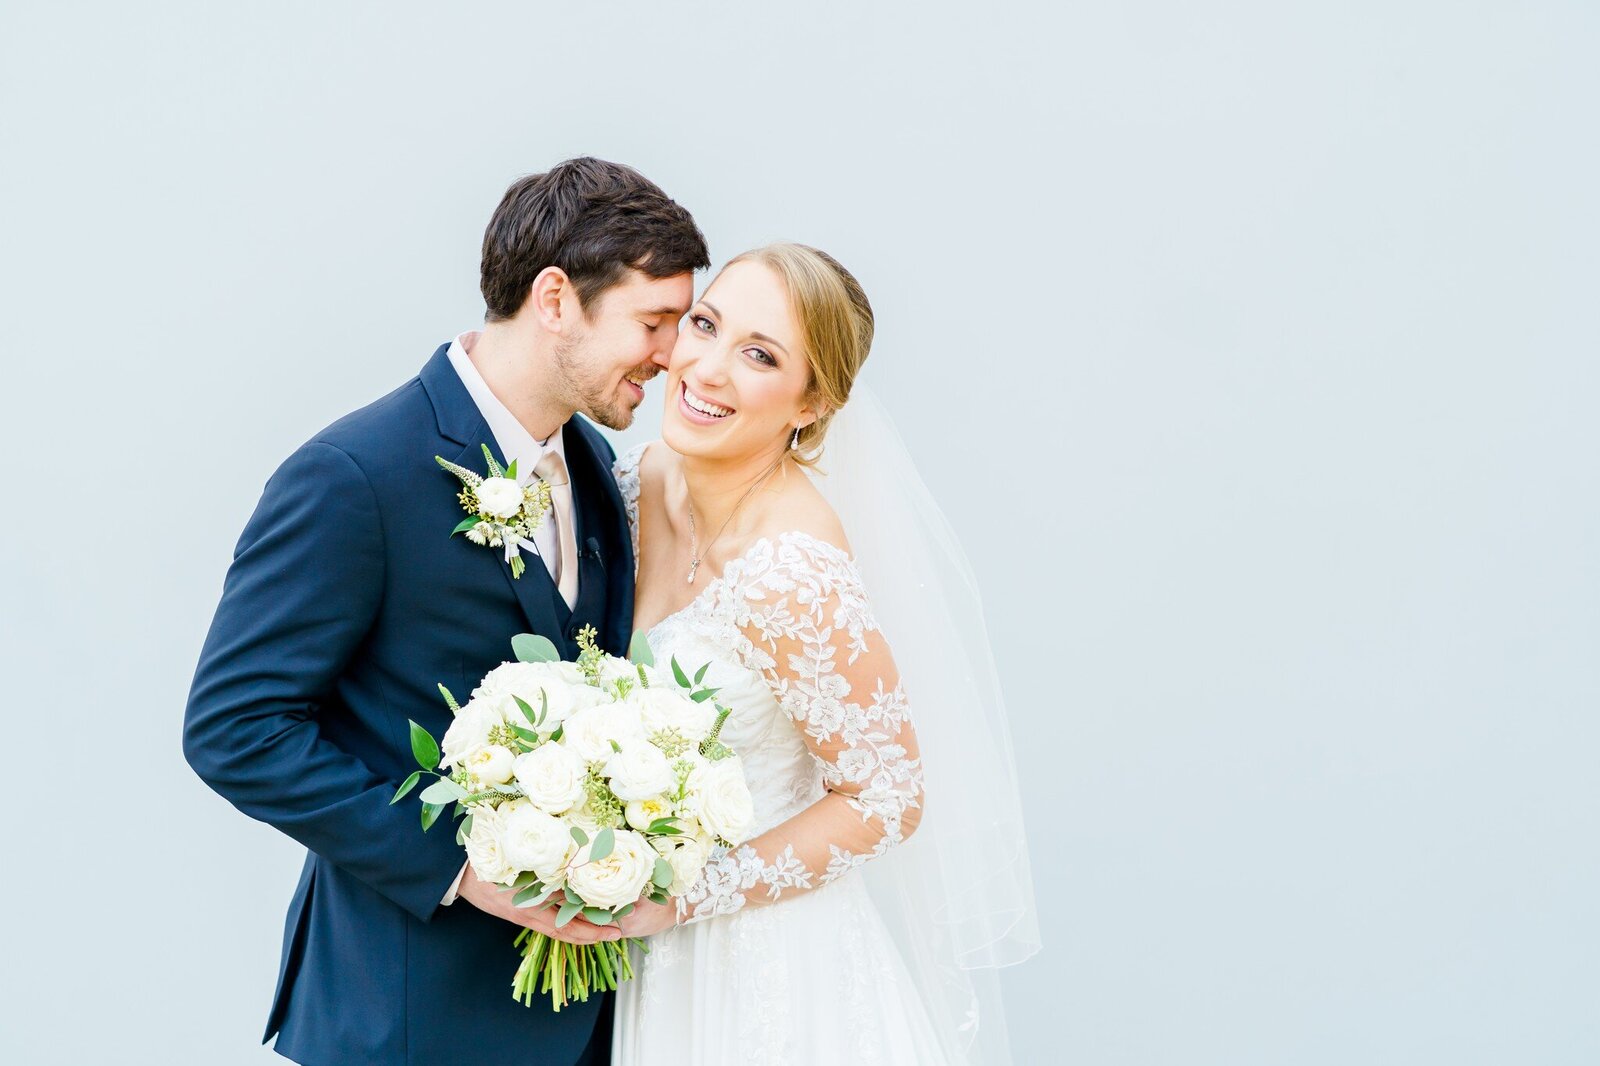 NH couple smiling with white bouquet